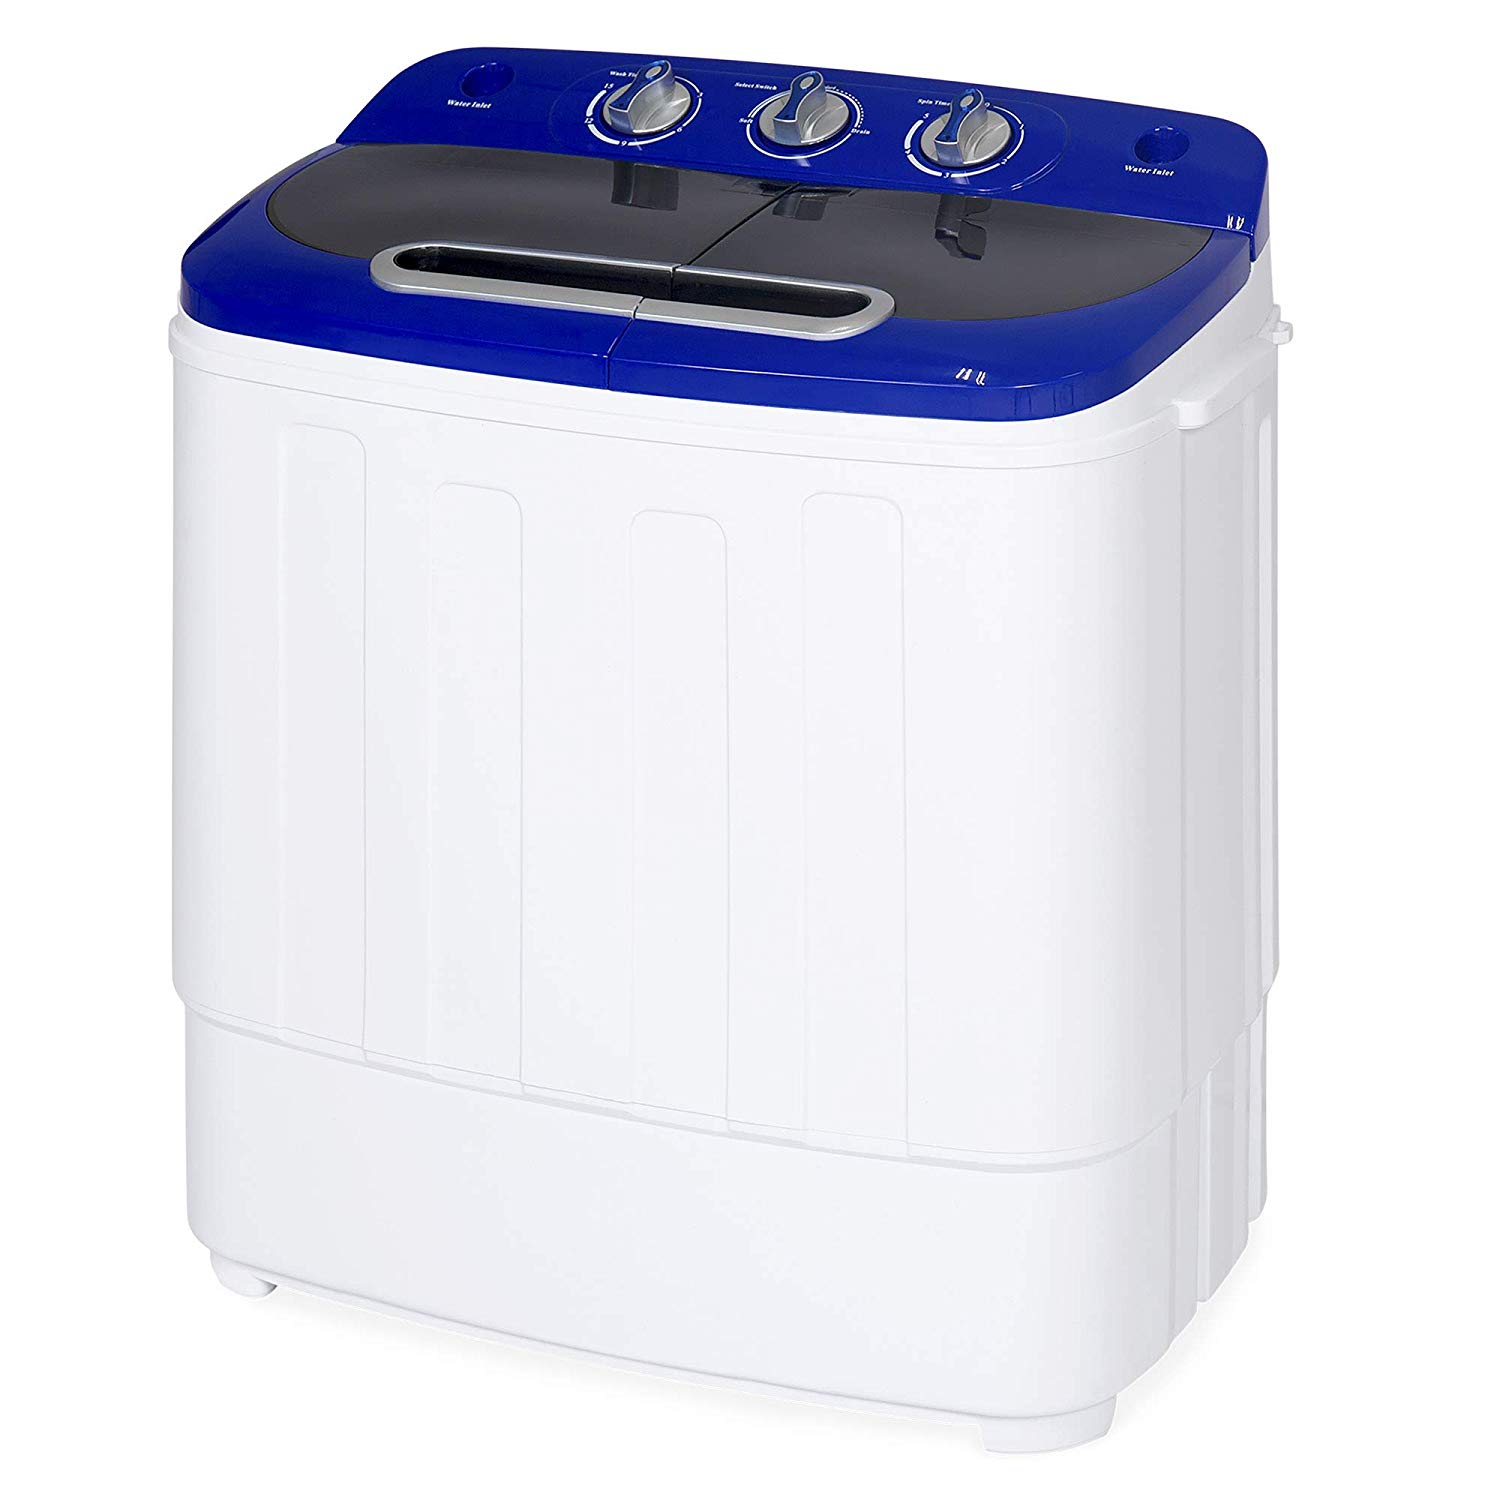 Best Choice Products Portable Compact Twin Tub Laundry Machine & Spin Cycle w/Hose, 13lbs Capacity - White/Blue